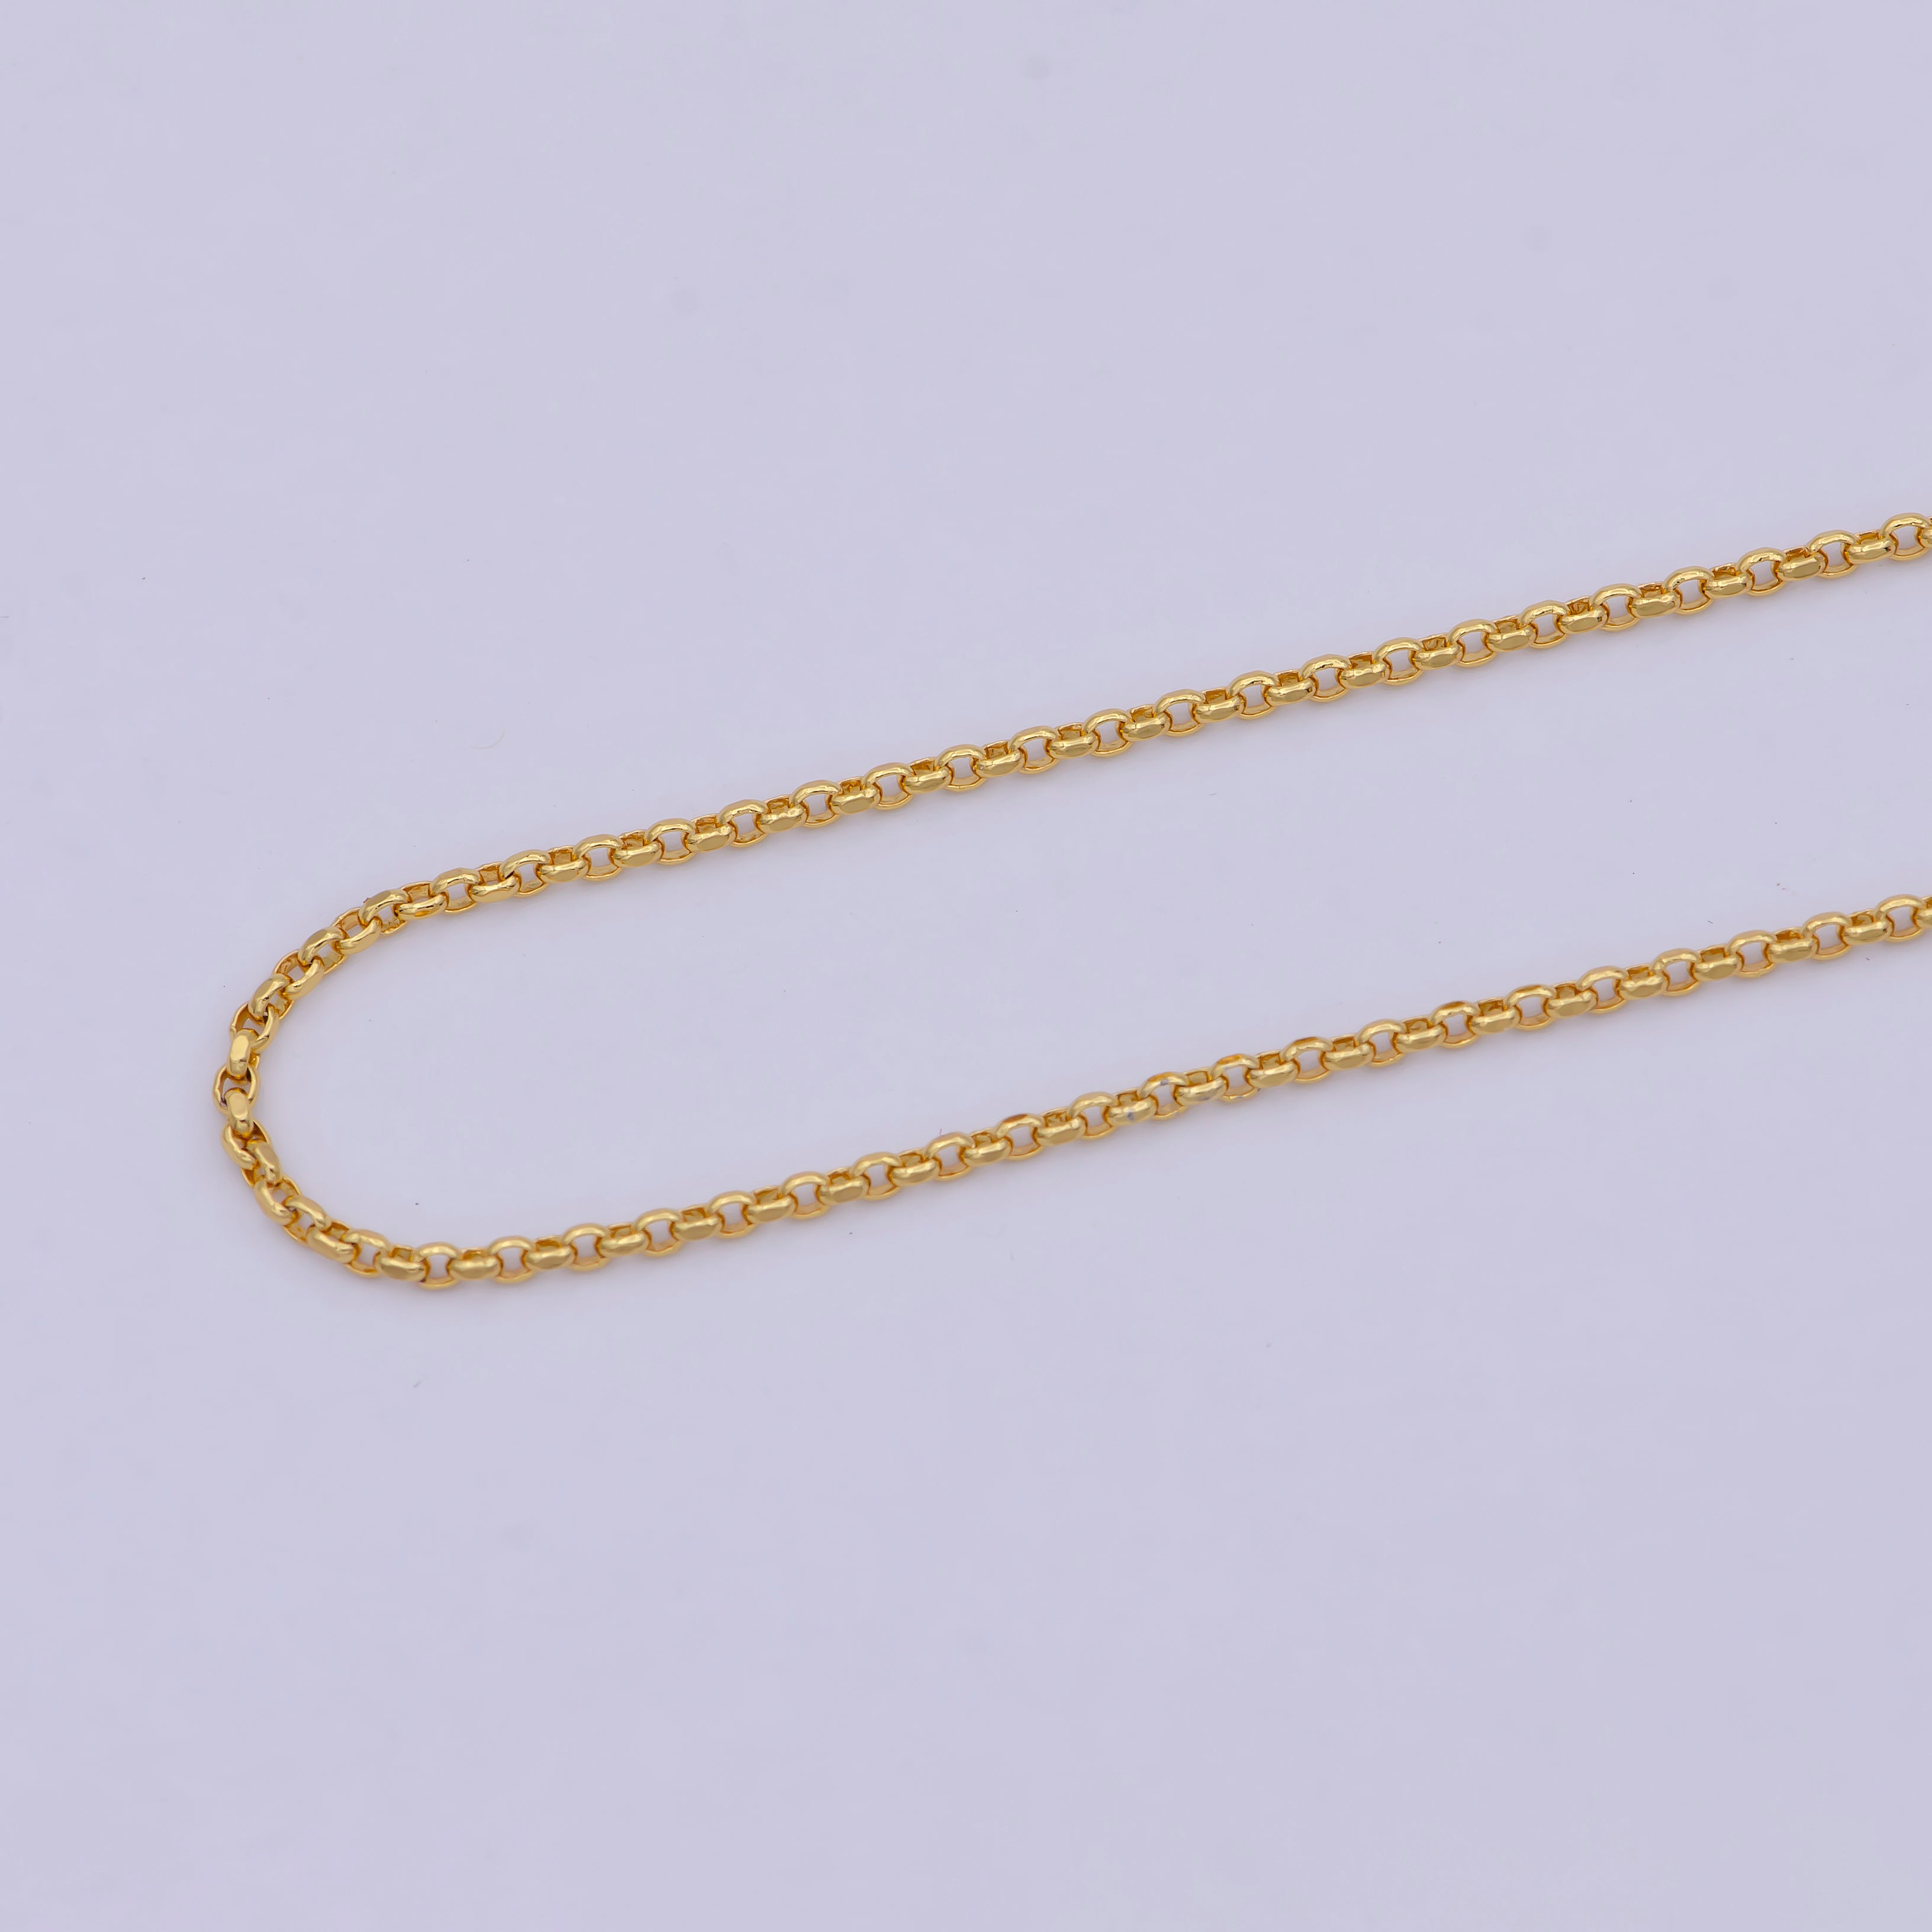 1.3mm 24K Gold Filled Chain, Rolo Chain Dainty Gold Necklace Chain, Circle Cable Chain Wholesale WA-747 - DLUXCA